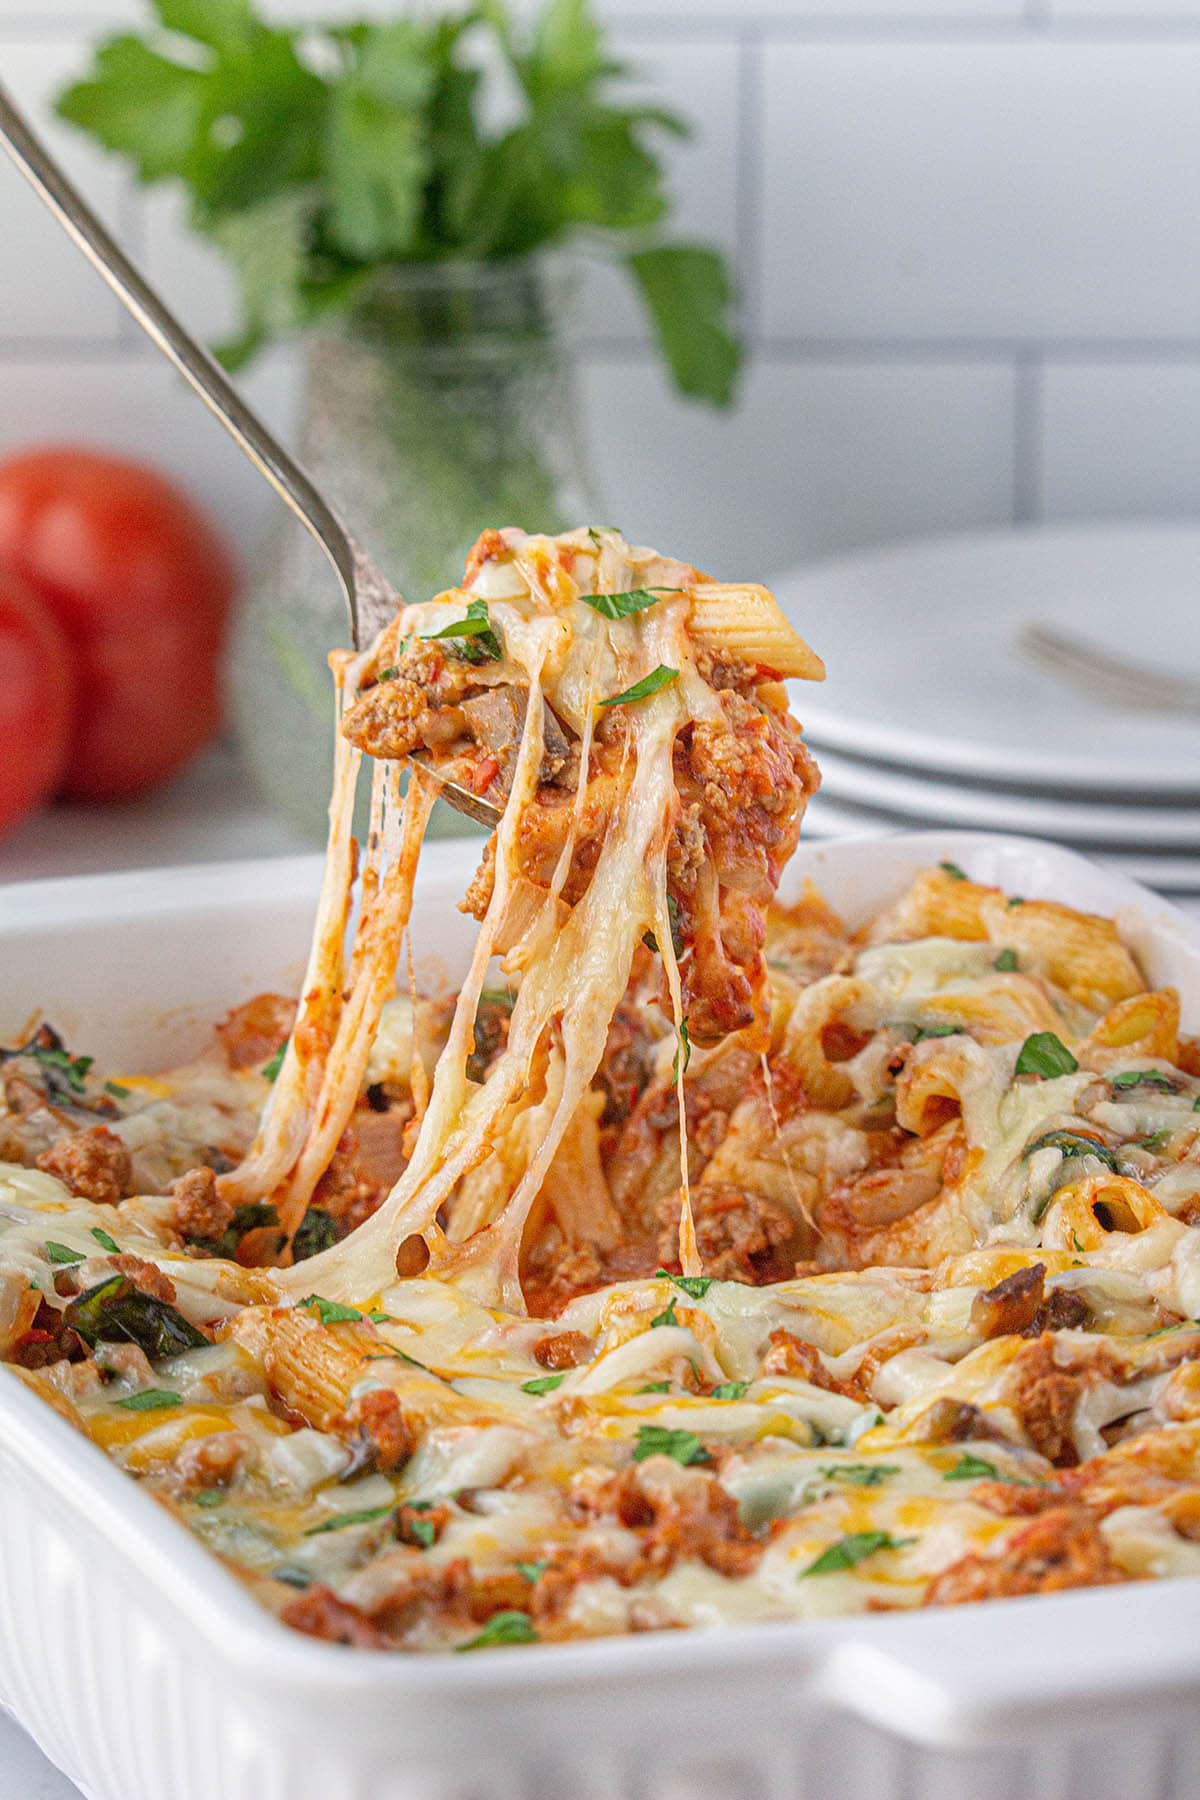 Baked casserole with a serving spoon taking a big scoop pasta.